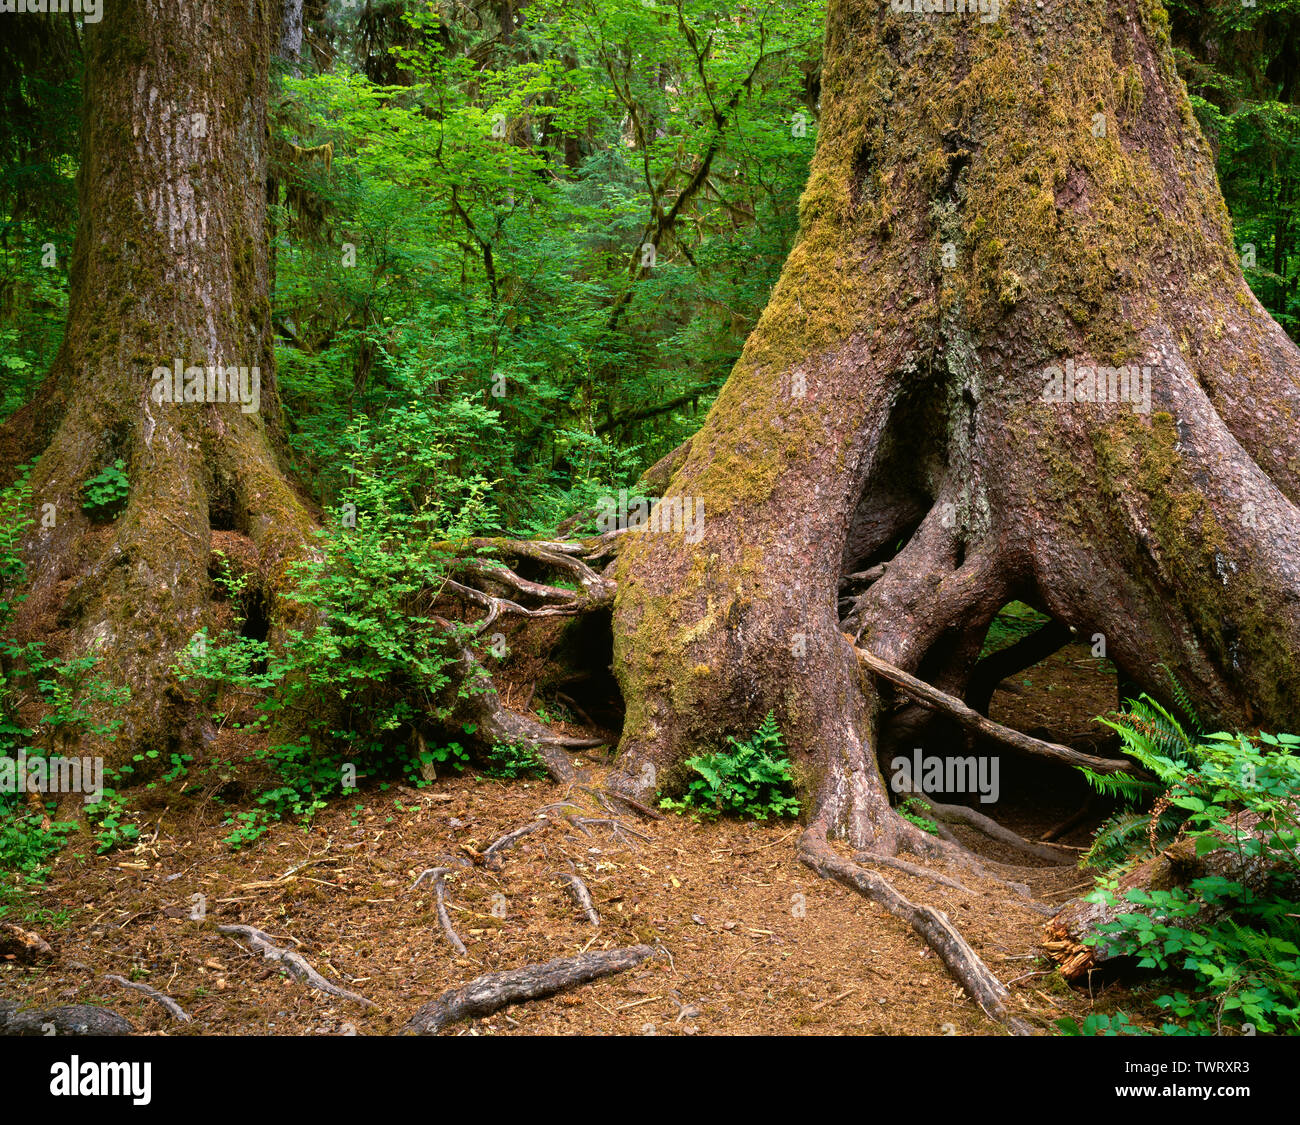 USA, Washington, Olympic National Park, Western hemlock and Sitka spruce demonstrate buttressed growth form from beginning life on a nurse log. Stock Photo